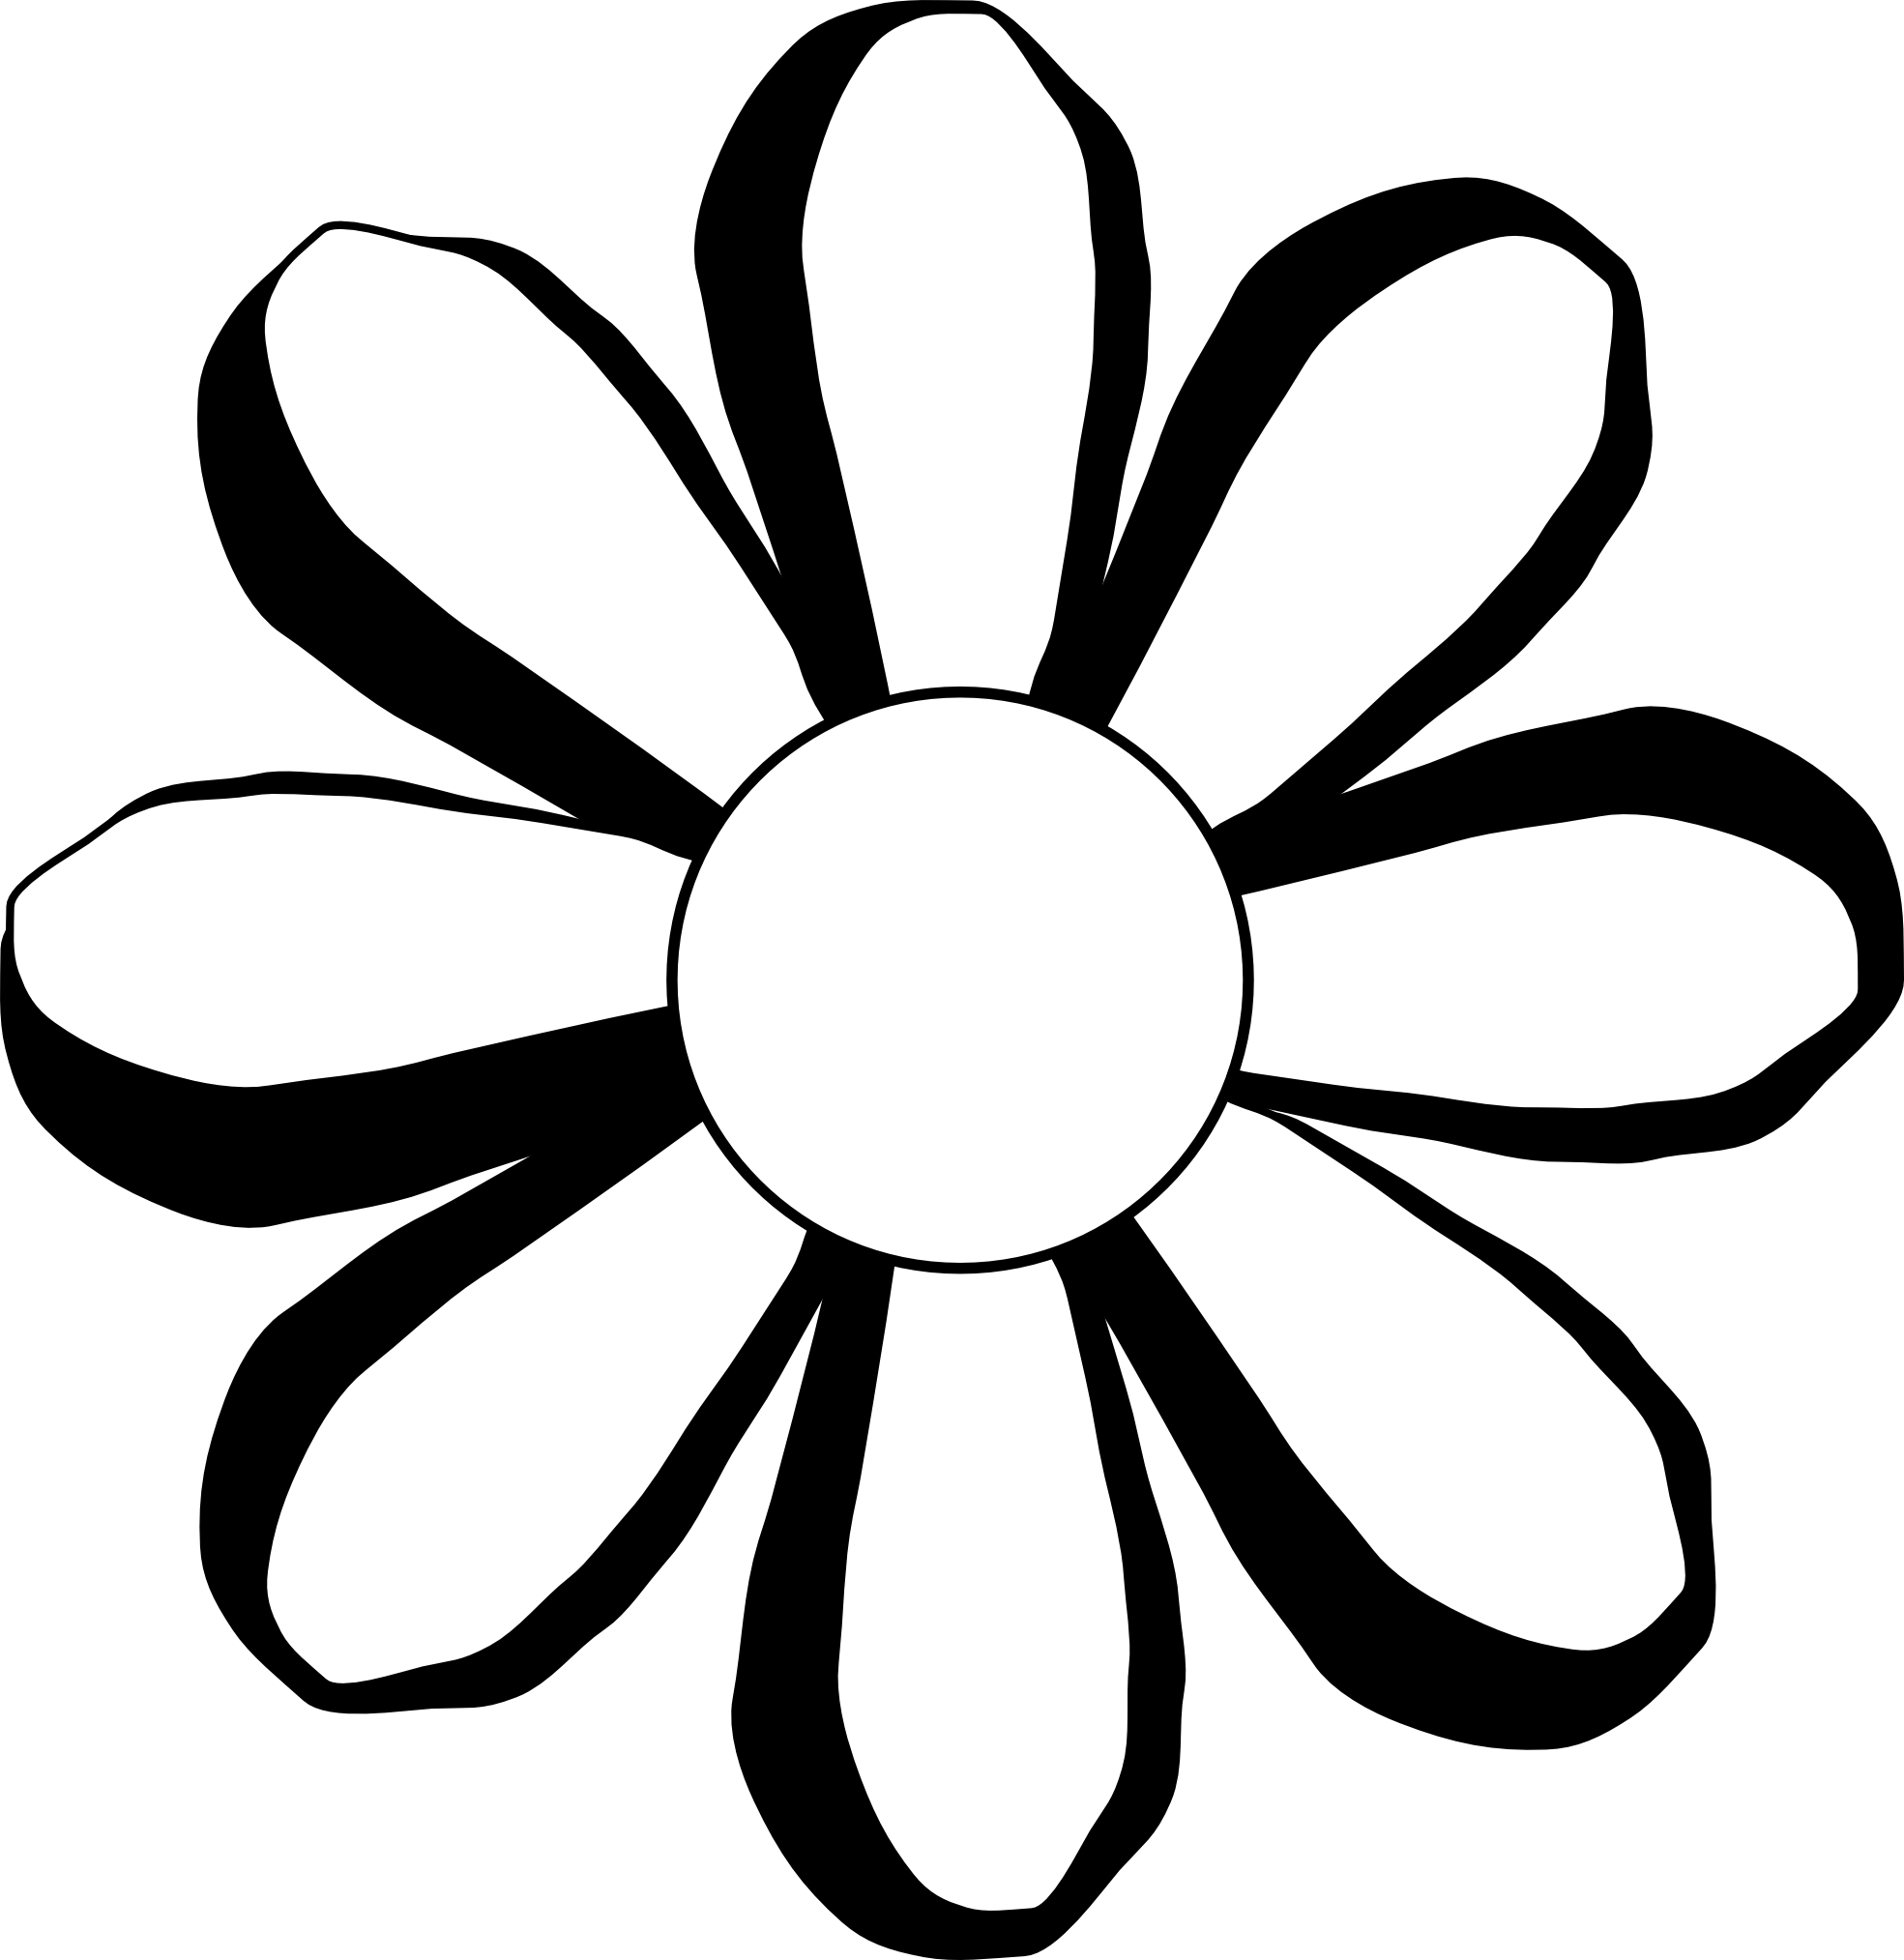 Black And White Flower Design Clipart Free download on